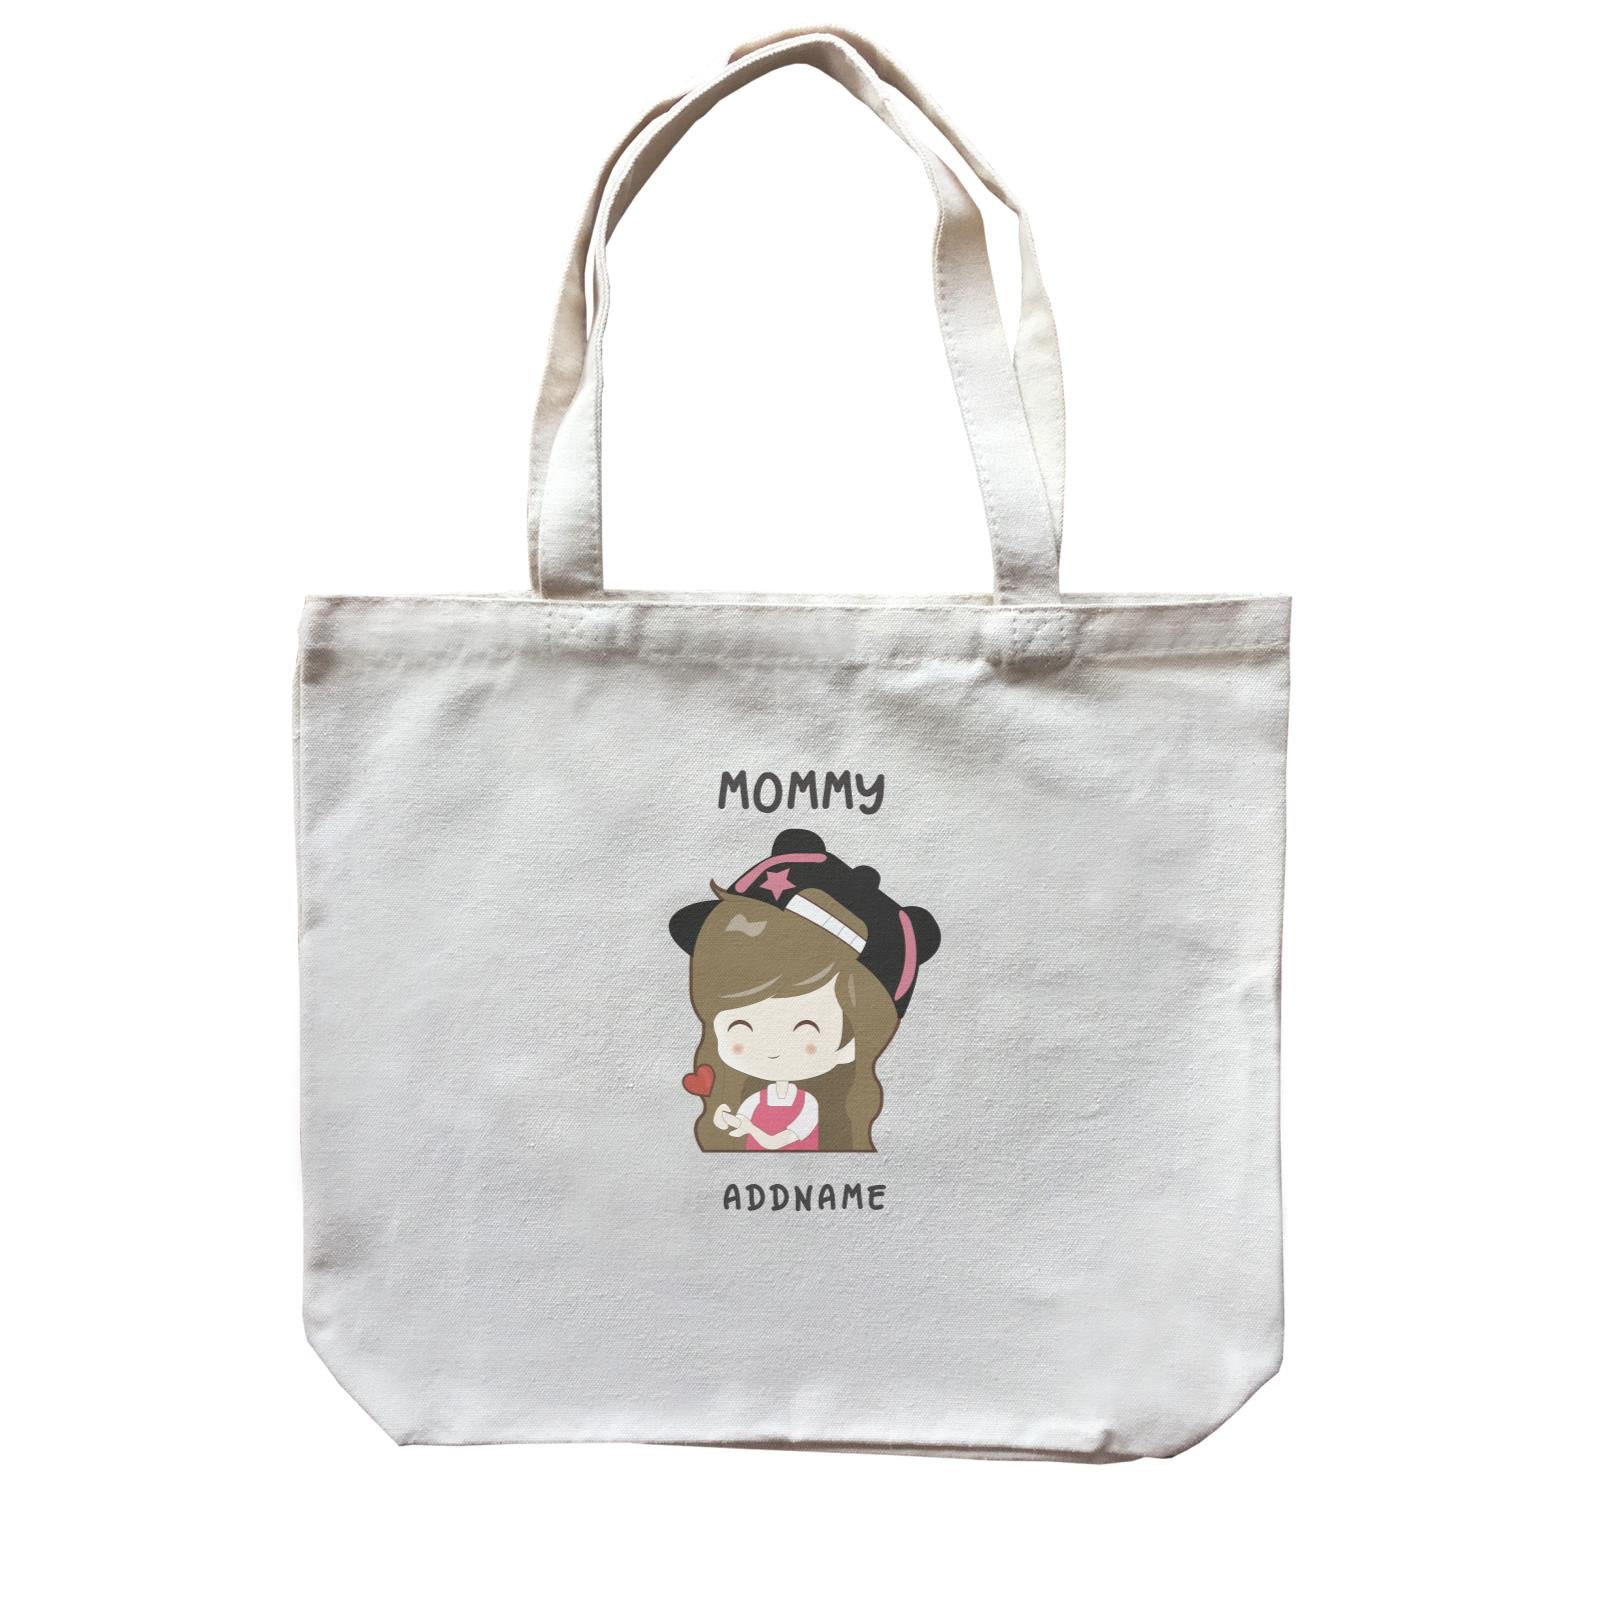 My Lovely Family Series Mommy Addname Canvas Bag